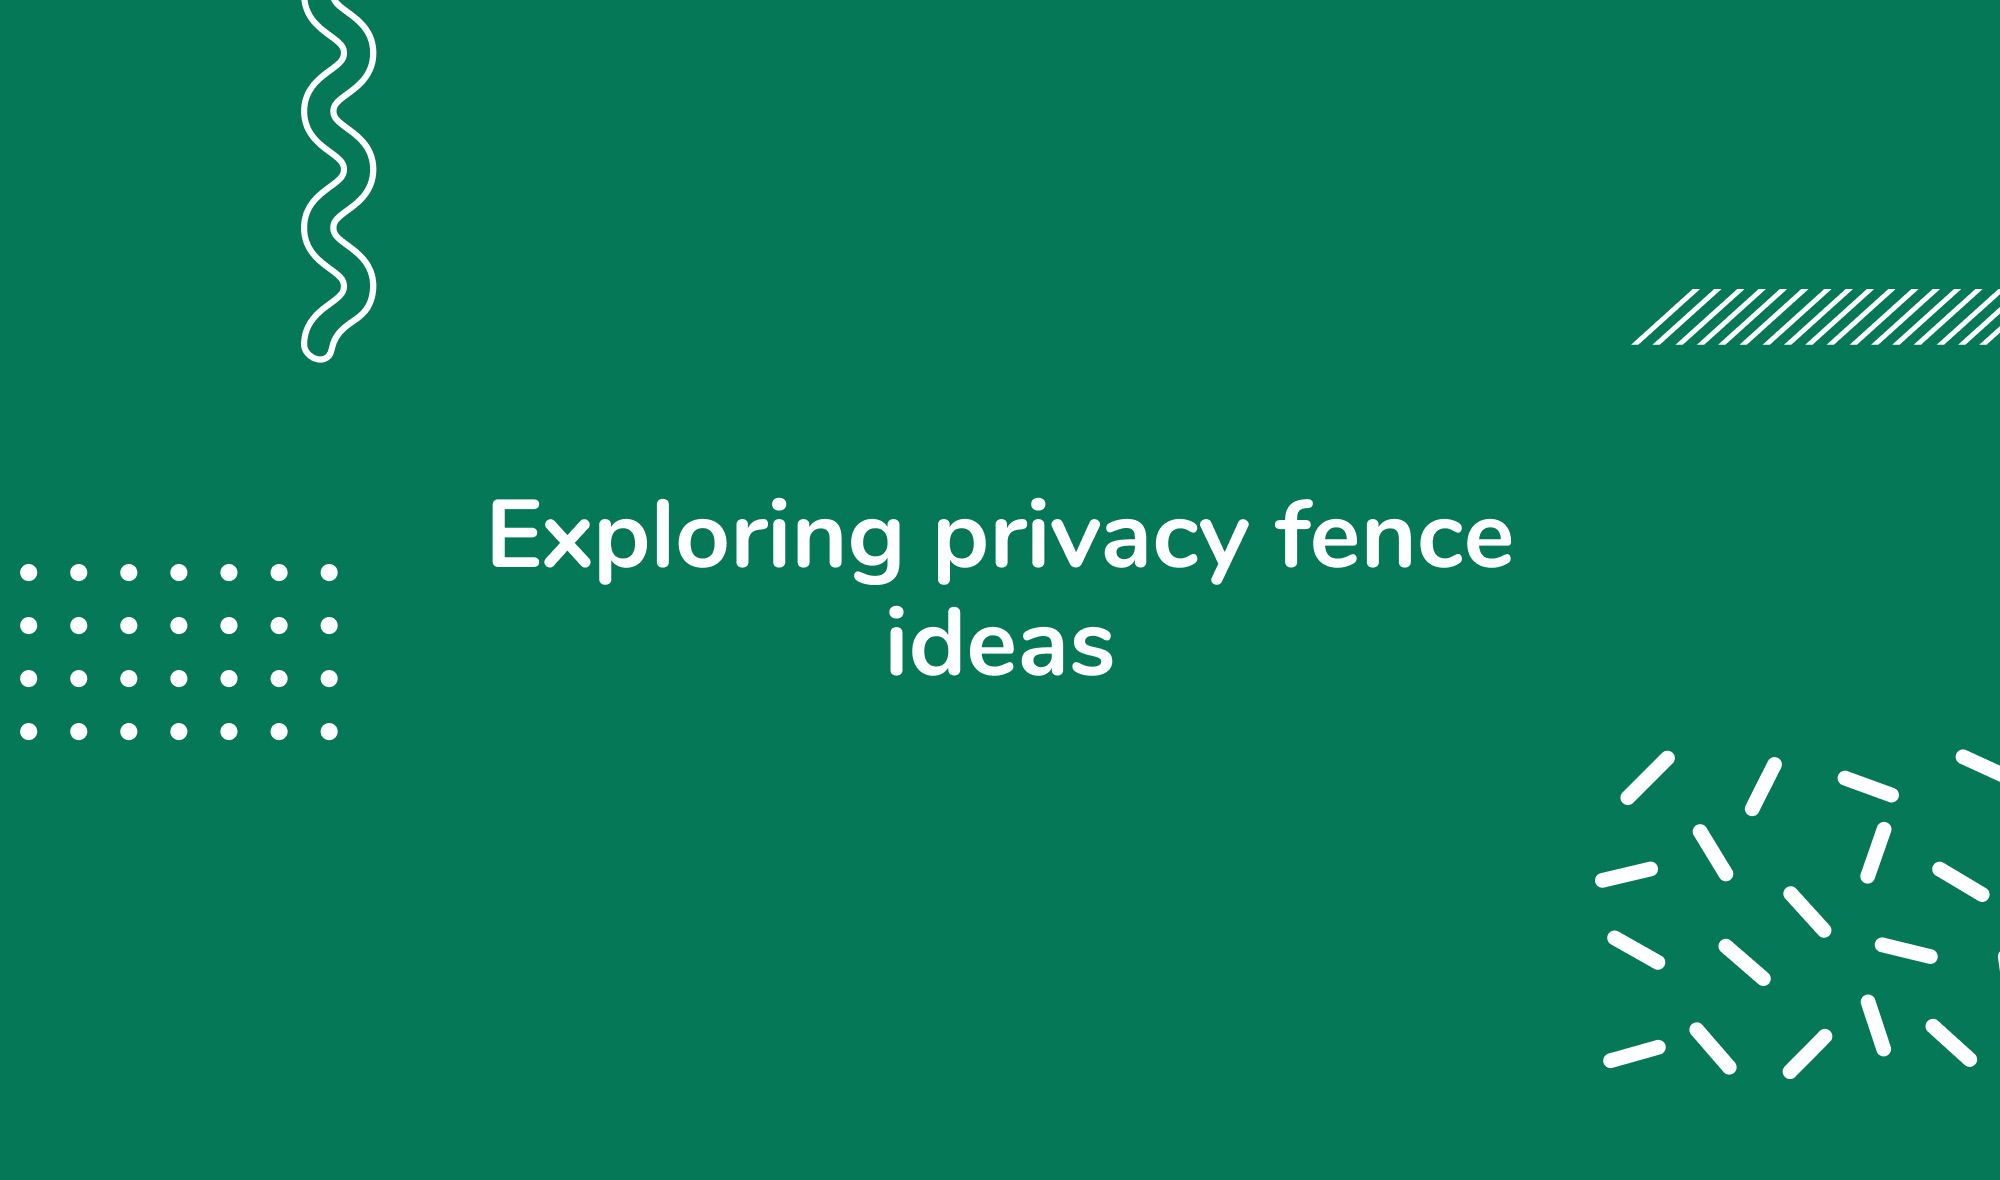 Exploring privacy fence ideas